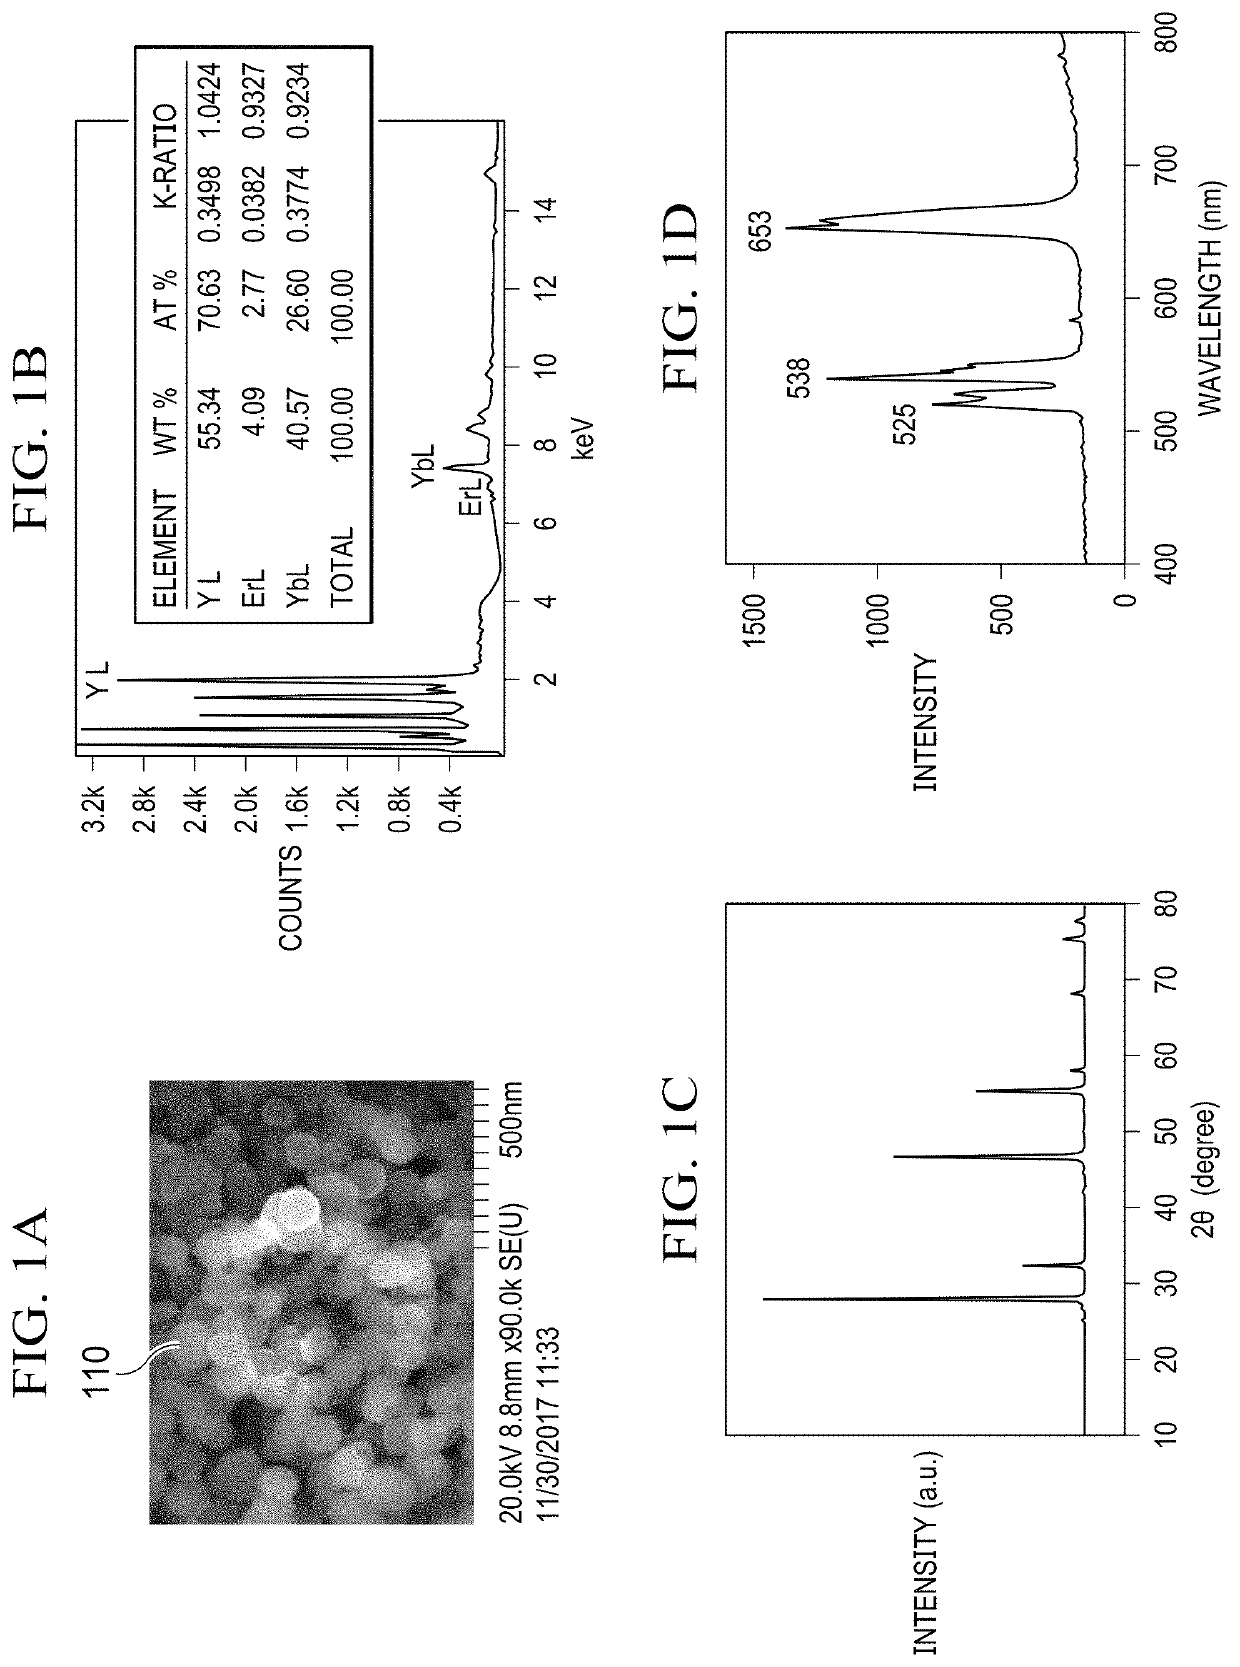 Single nir irradiation triggered upconversion NANO system for synergistic photodynamic and photothermal cancer therapy